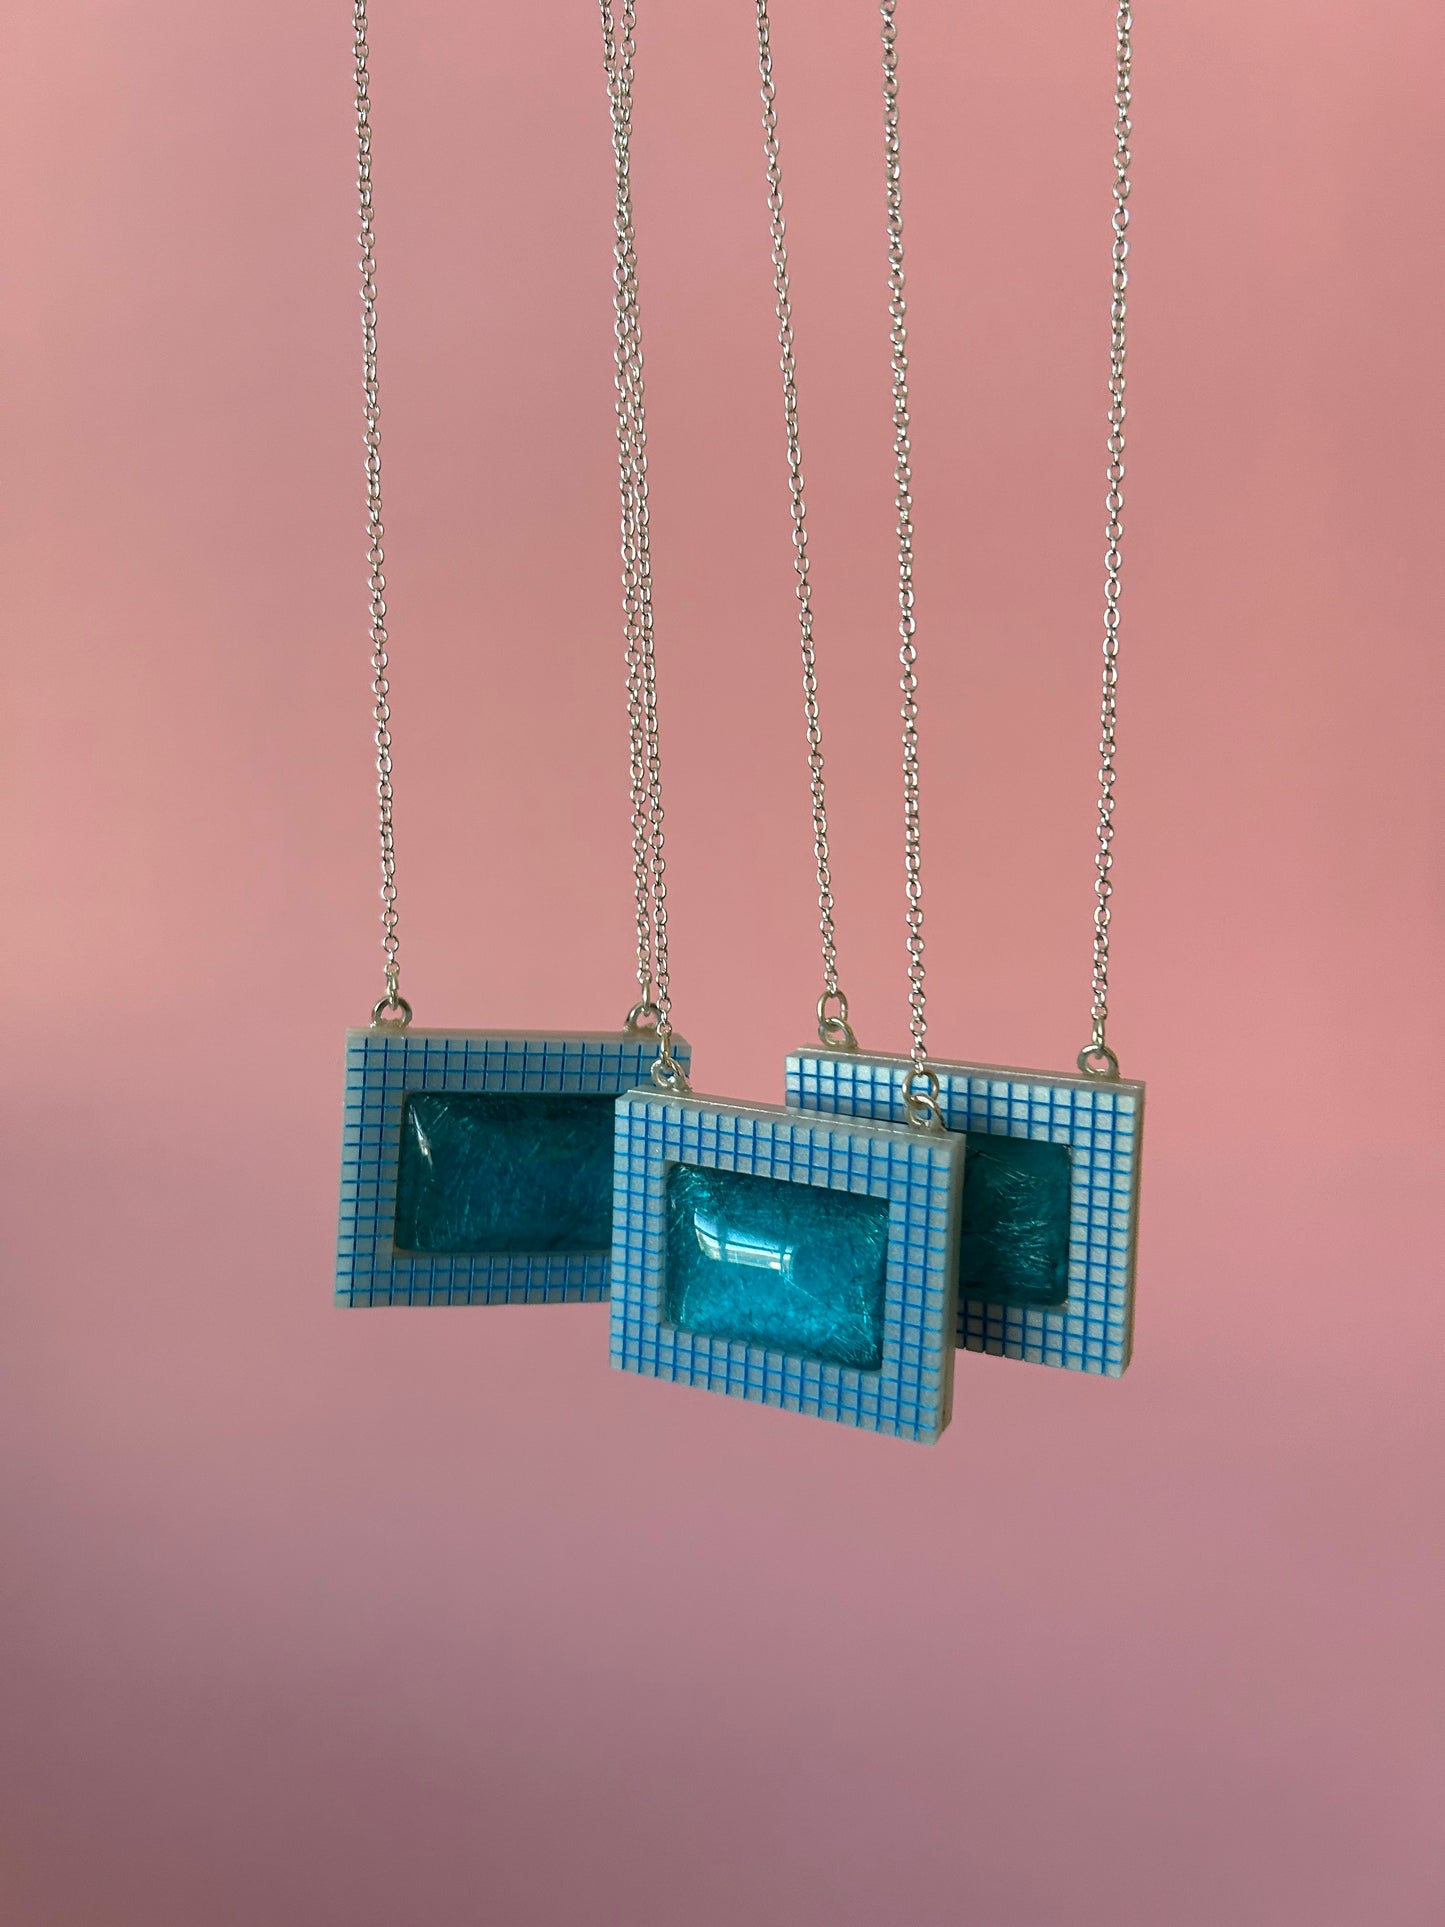 Swimming Pool Acrylic Necklaces